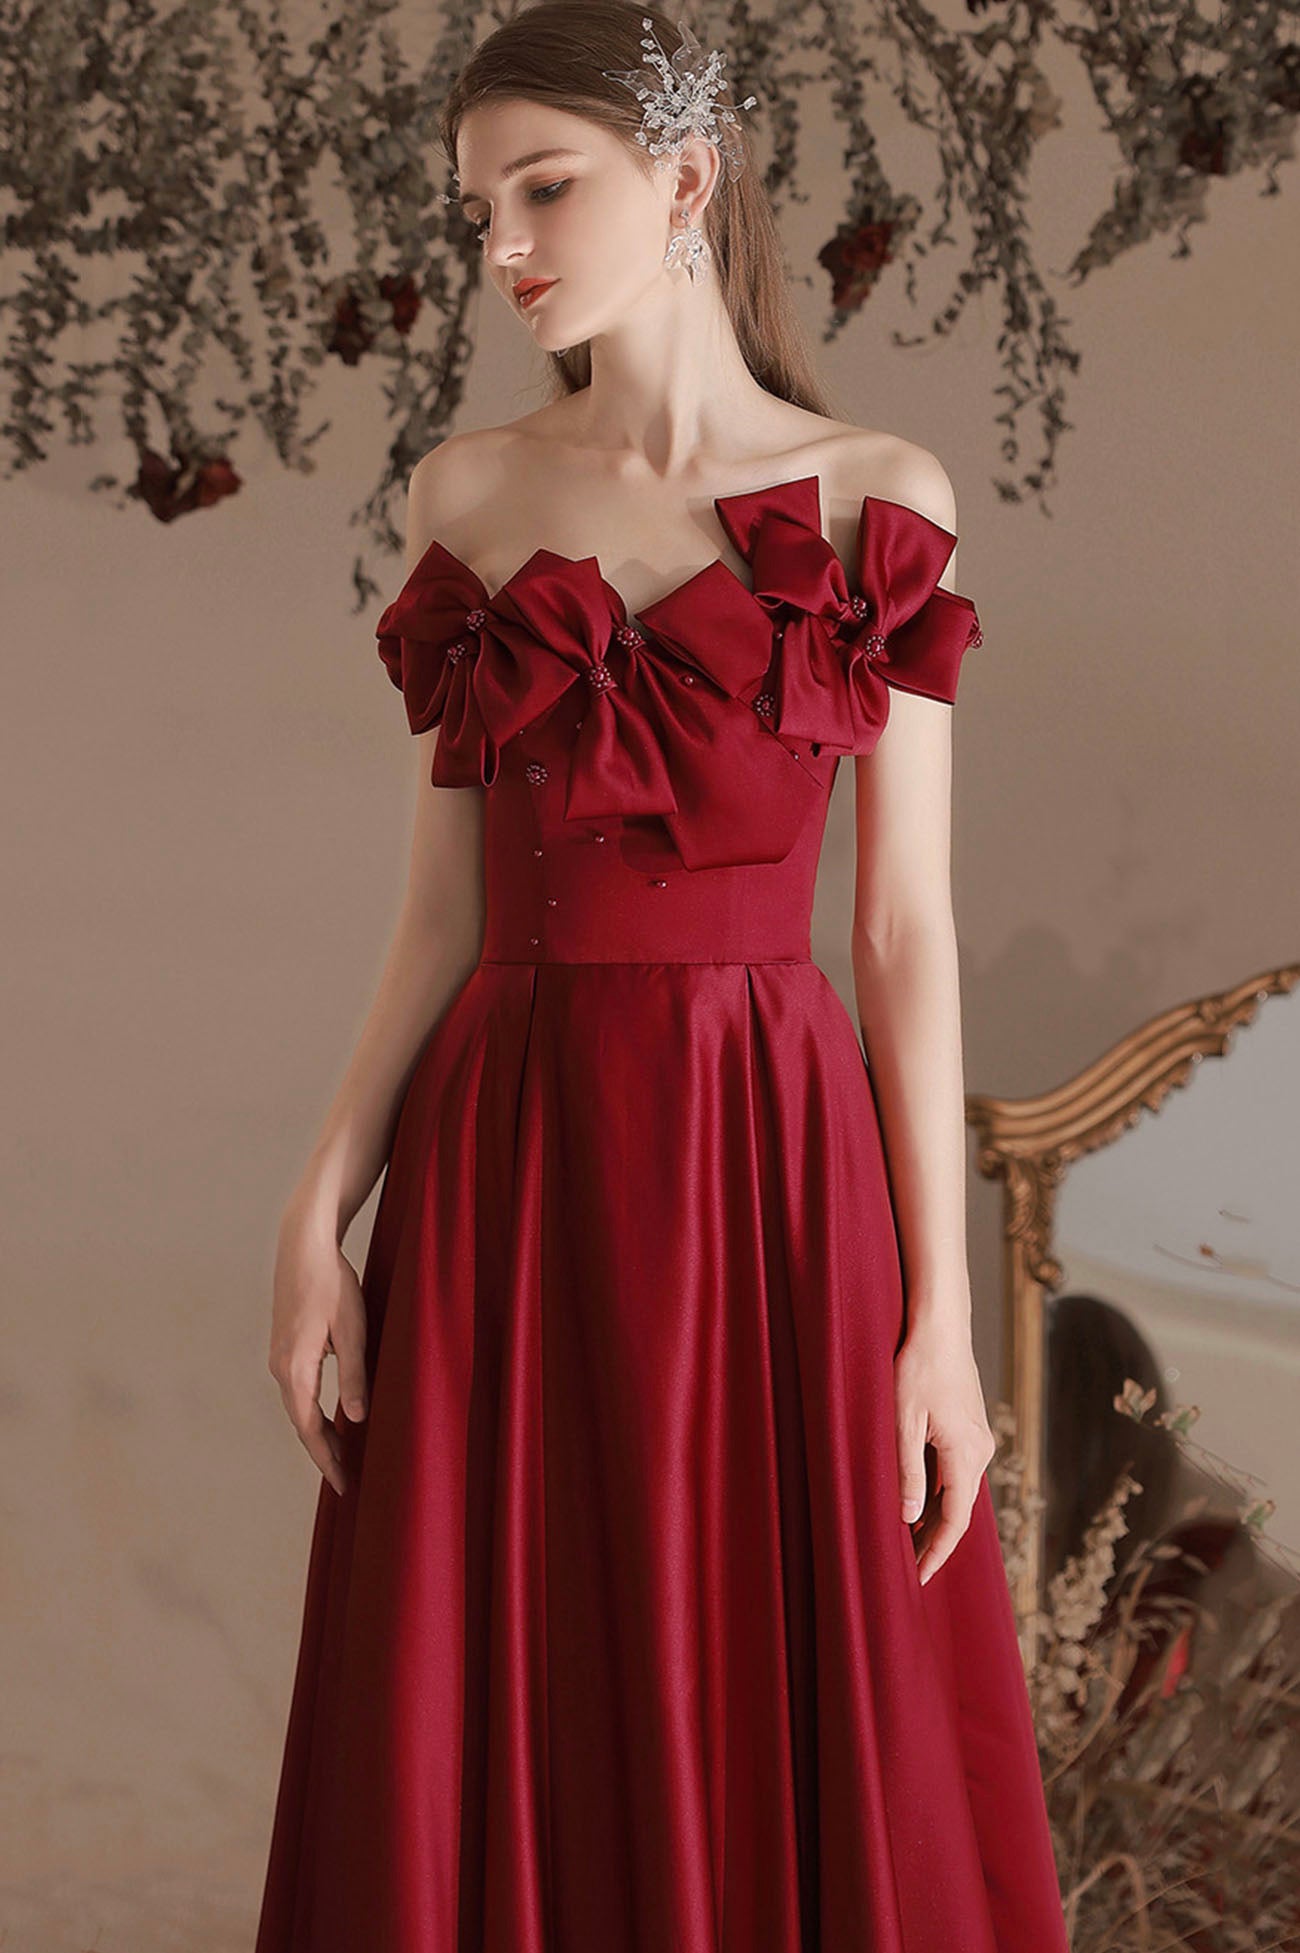 Burgundy Satin Long A-Line Prom Dress, Off the Shoulder Evening Dress with Bow